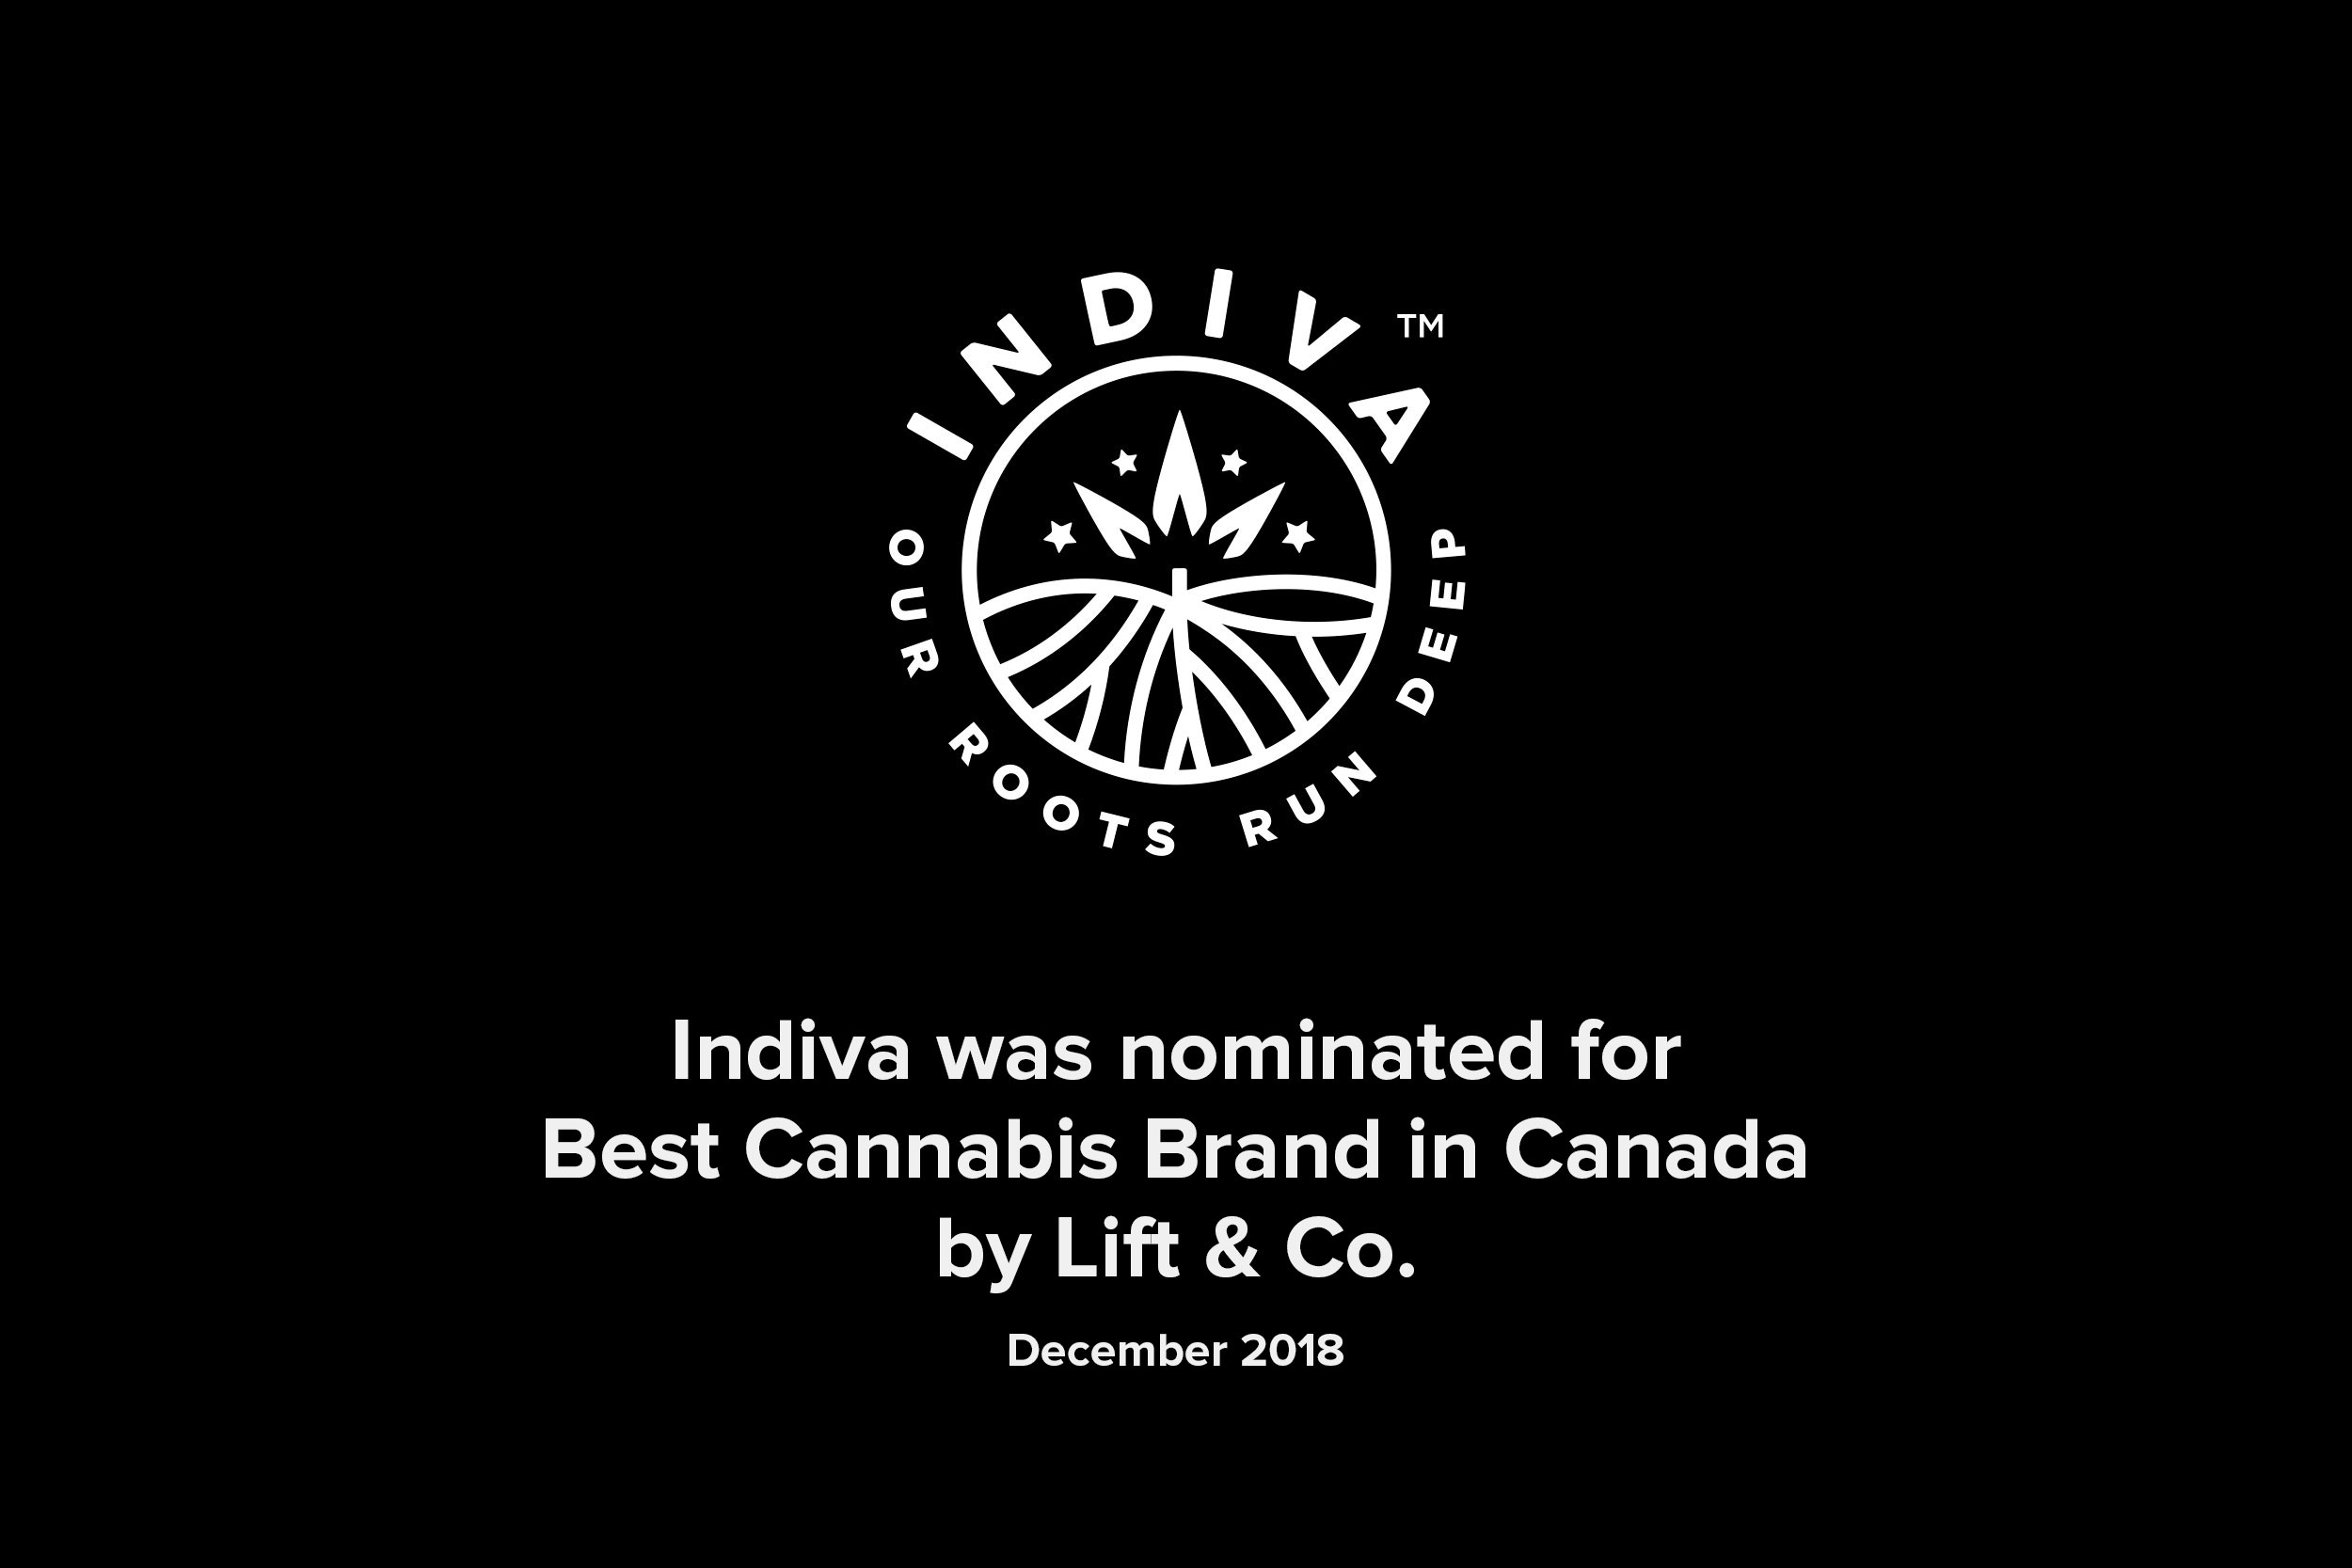 Best Cannabis Brand Nomination by Lift & Co. – Indiva